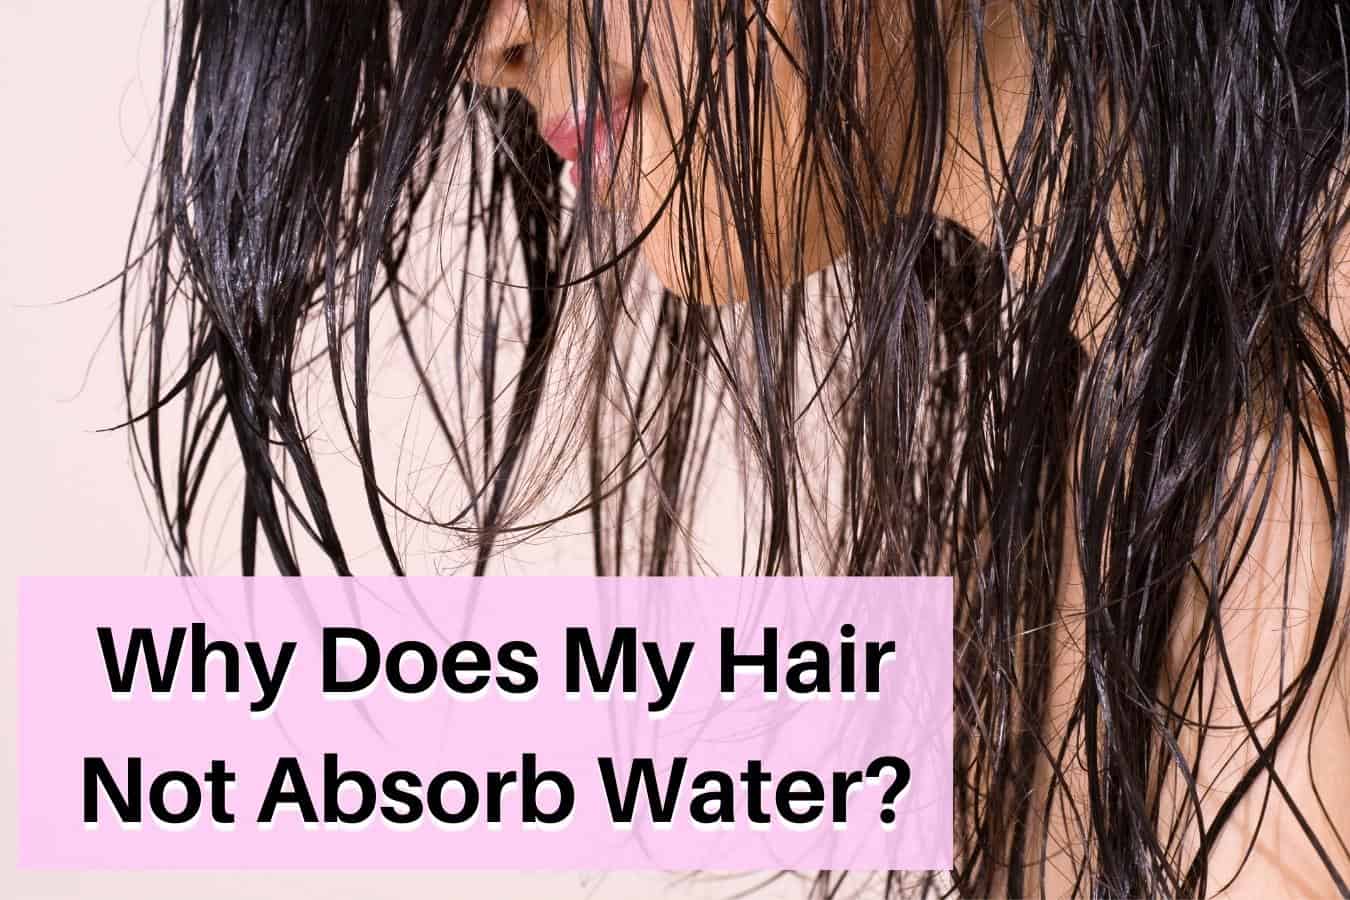 Hair Does Not Absorb Water